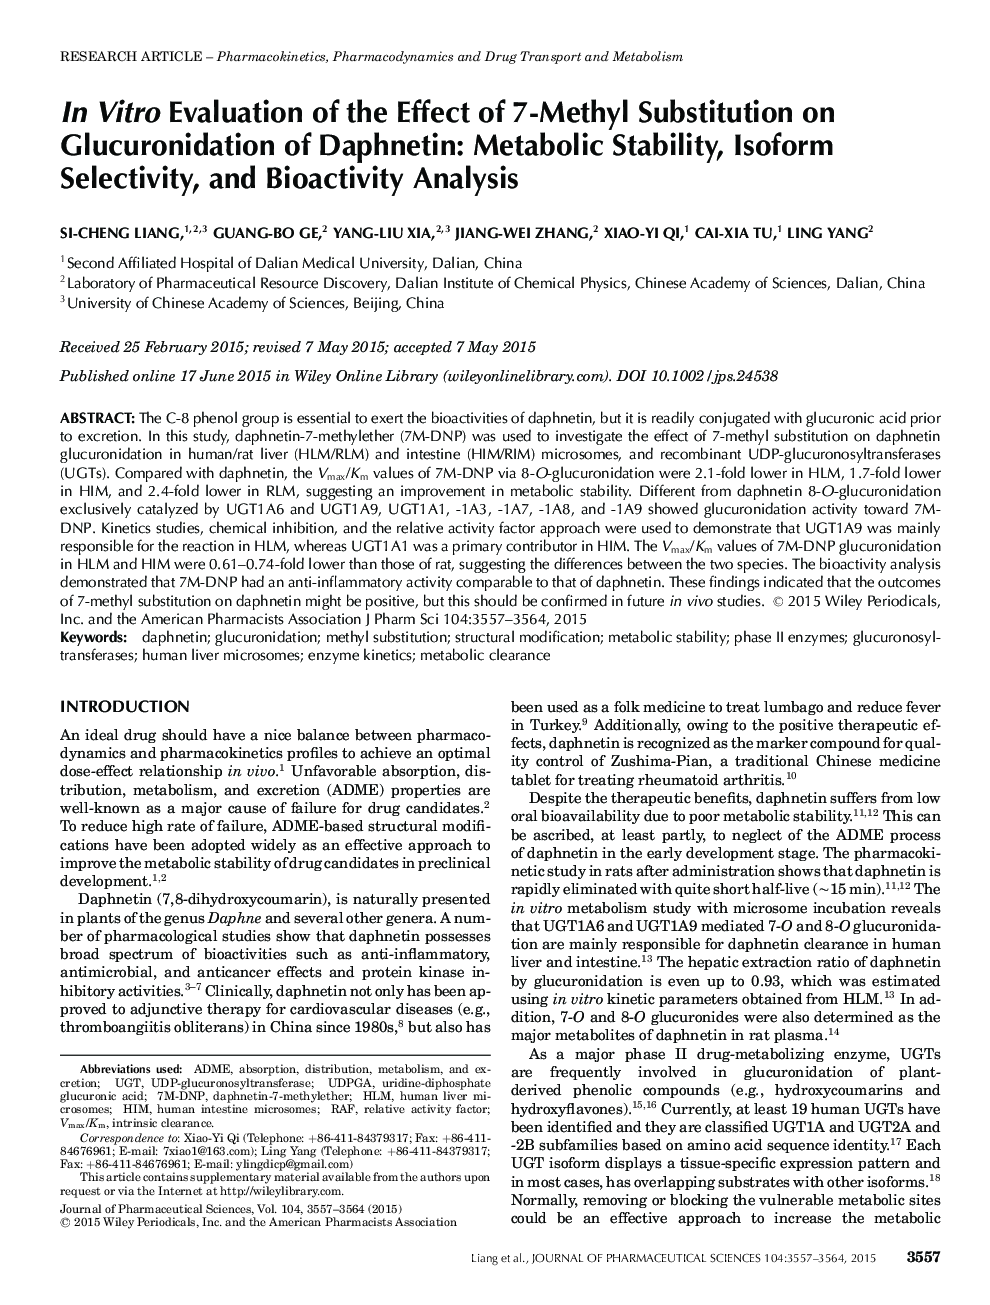 In Vitro Evaluation of the Effect of 7-Methyl Substitution on Glucuronidation of Daphnetin: Metabolic Stability, Isoform Selectivity, and Bioactivity Analysis